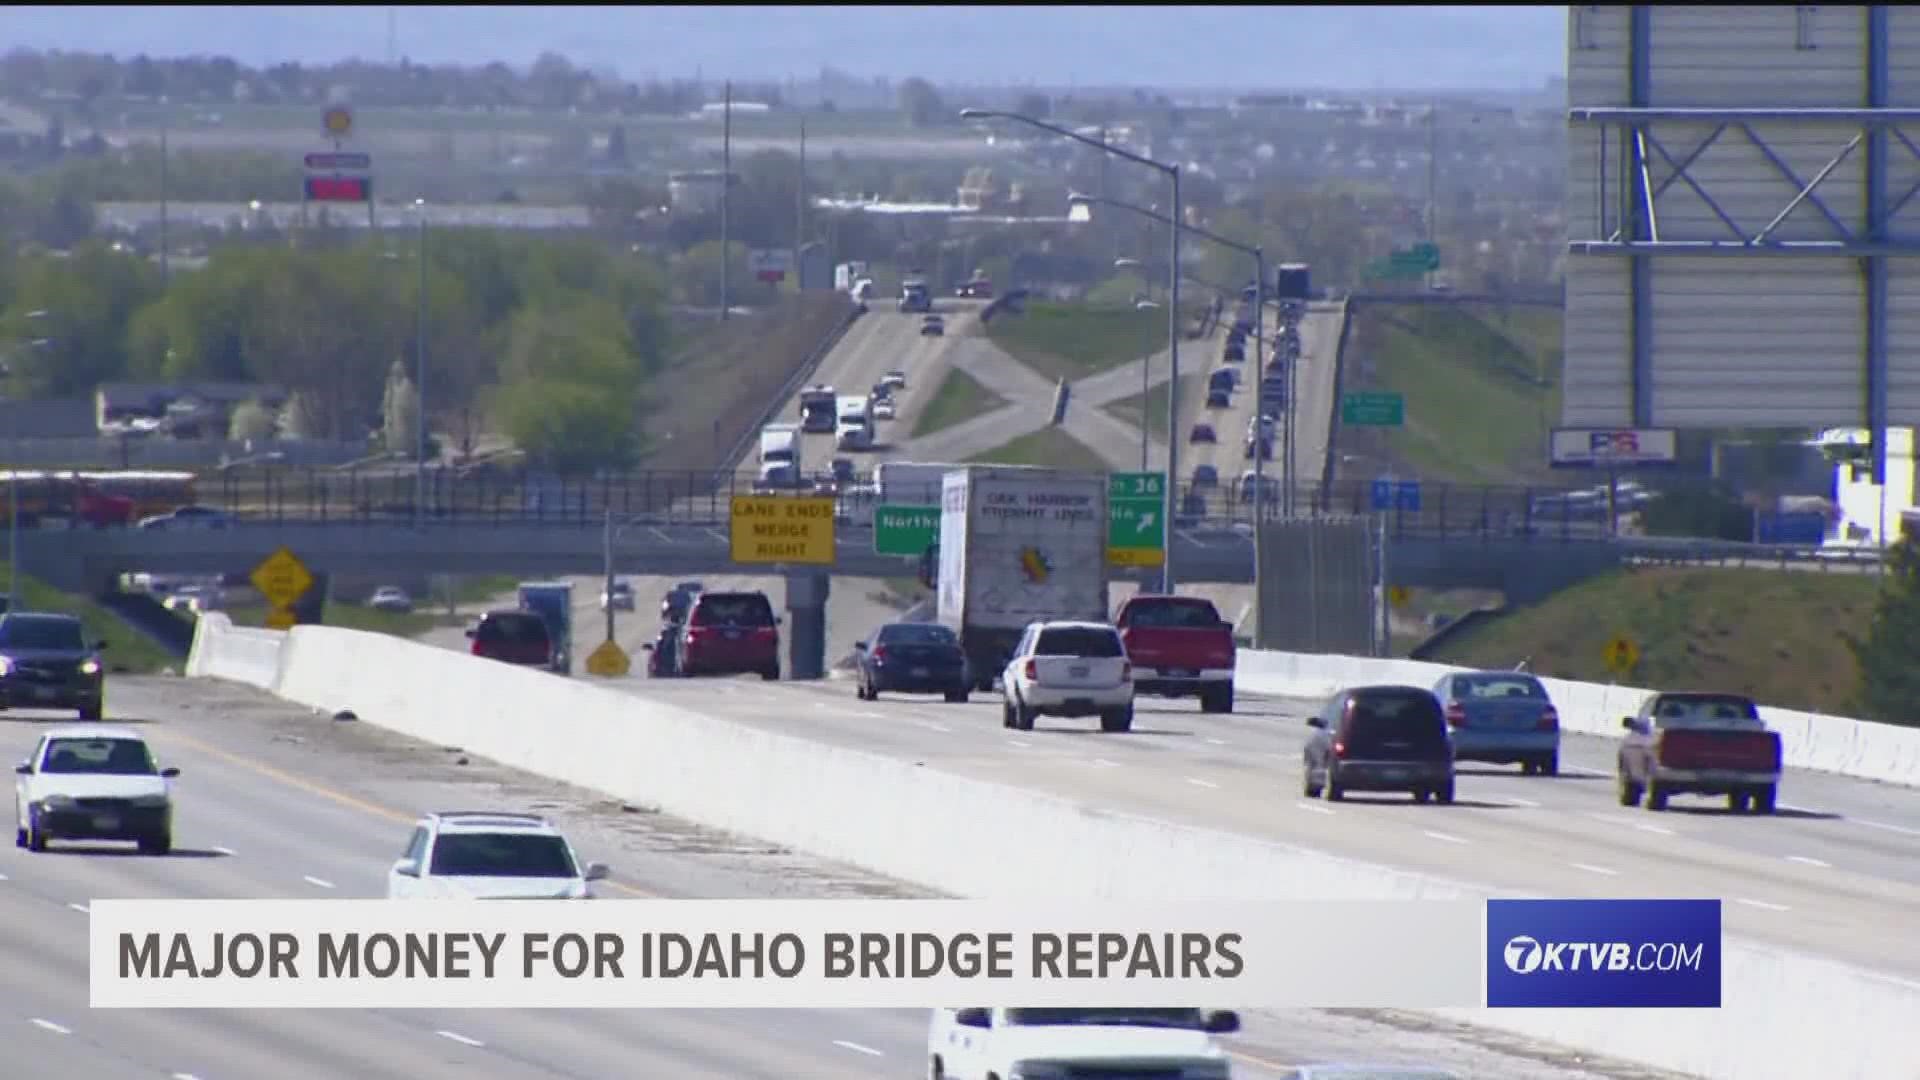 $200 million in state funding will be used to repair one-third of the 428 locally-owned bridges rated as poor.